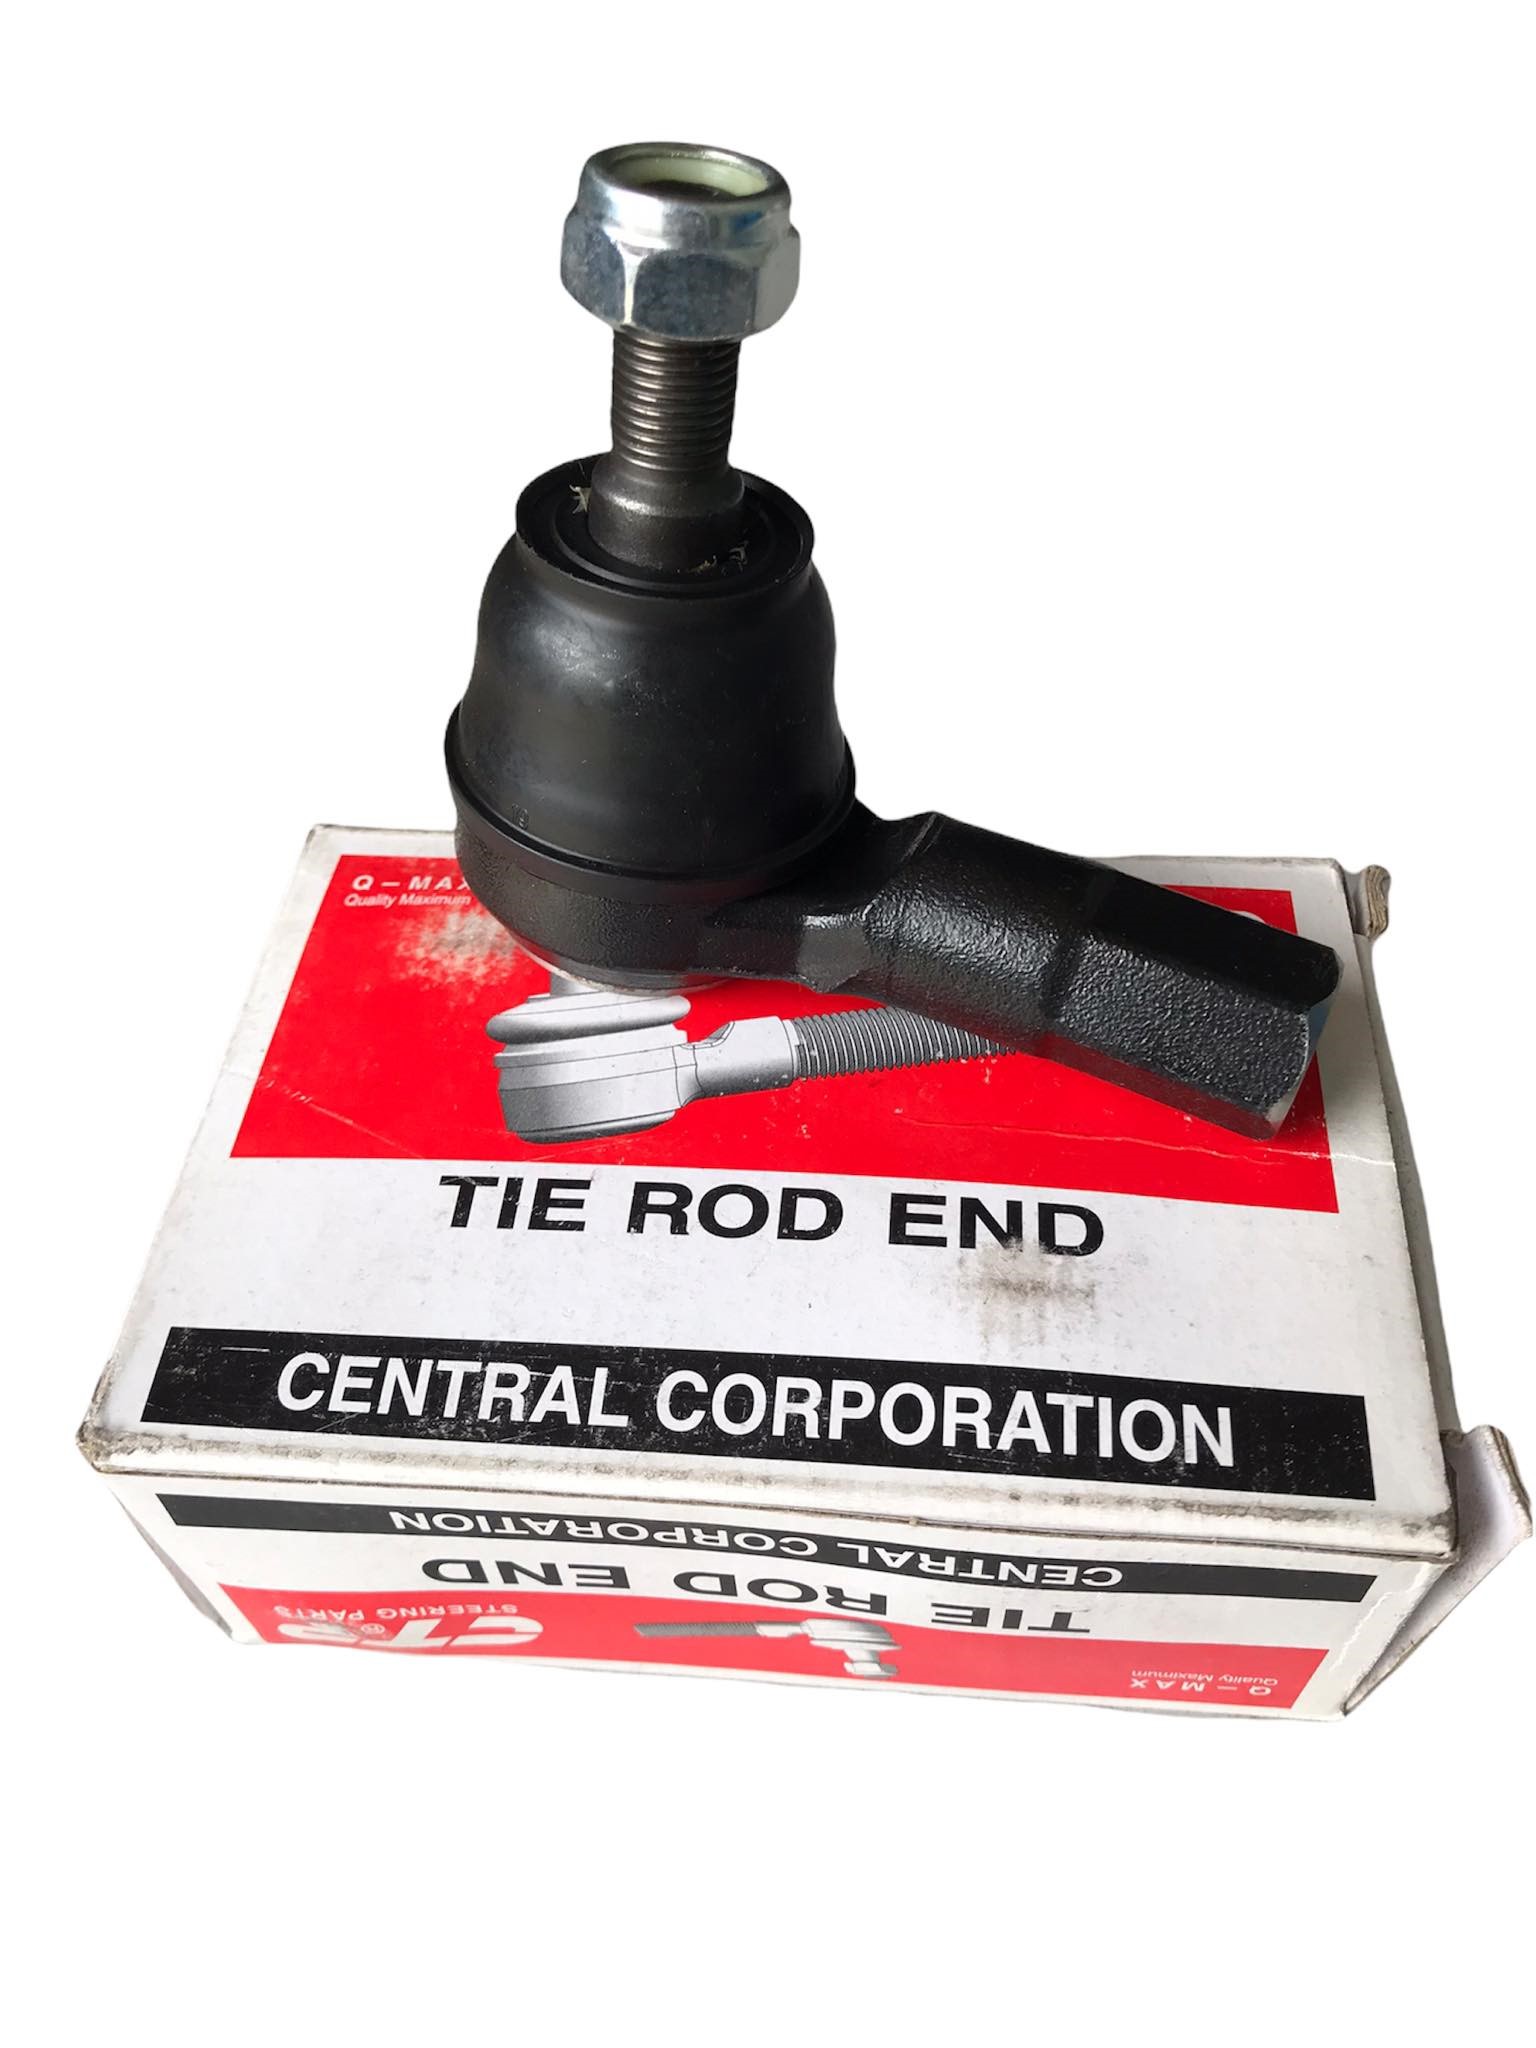 REPLACEMENT] 5687243010=568204A000=568204A600 TIE ROD END HYUNDAI 